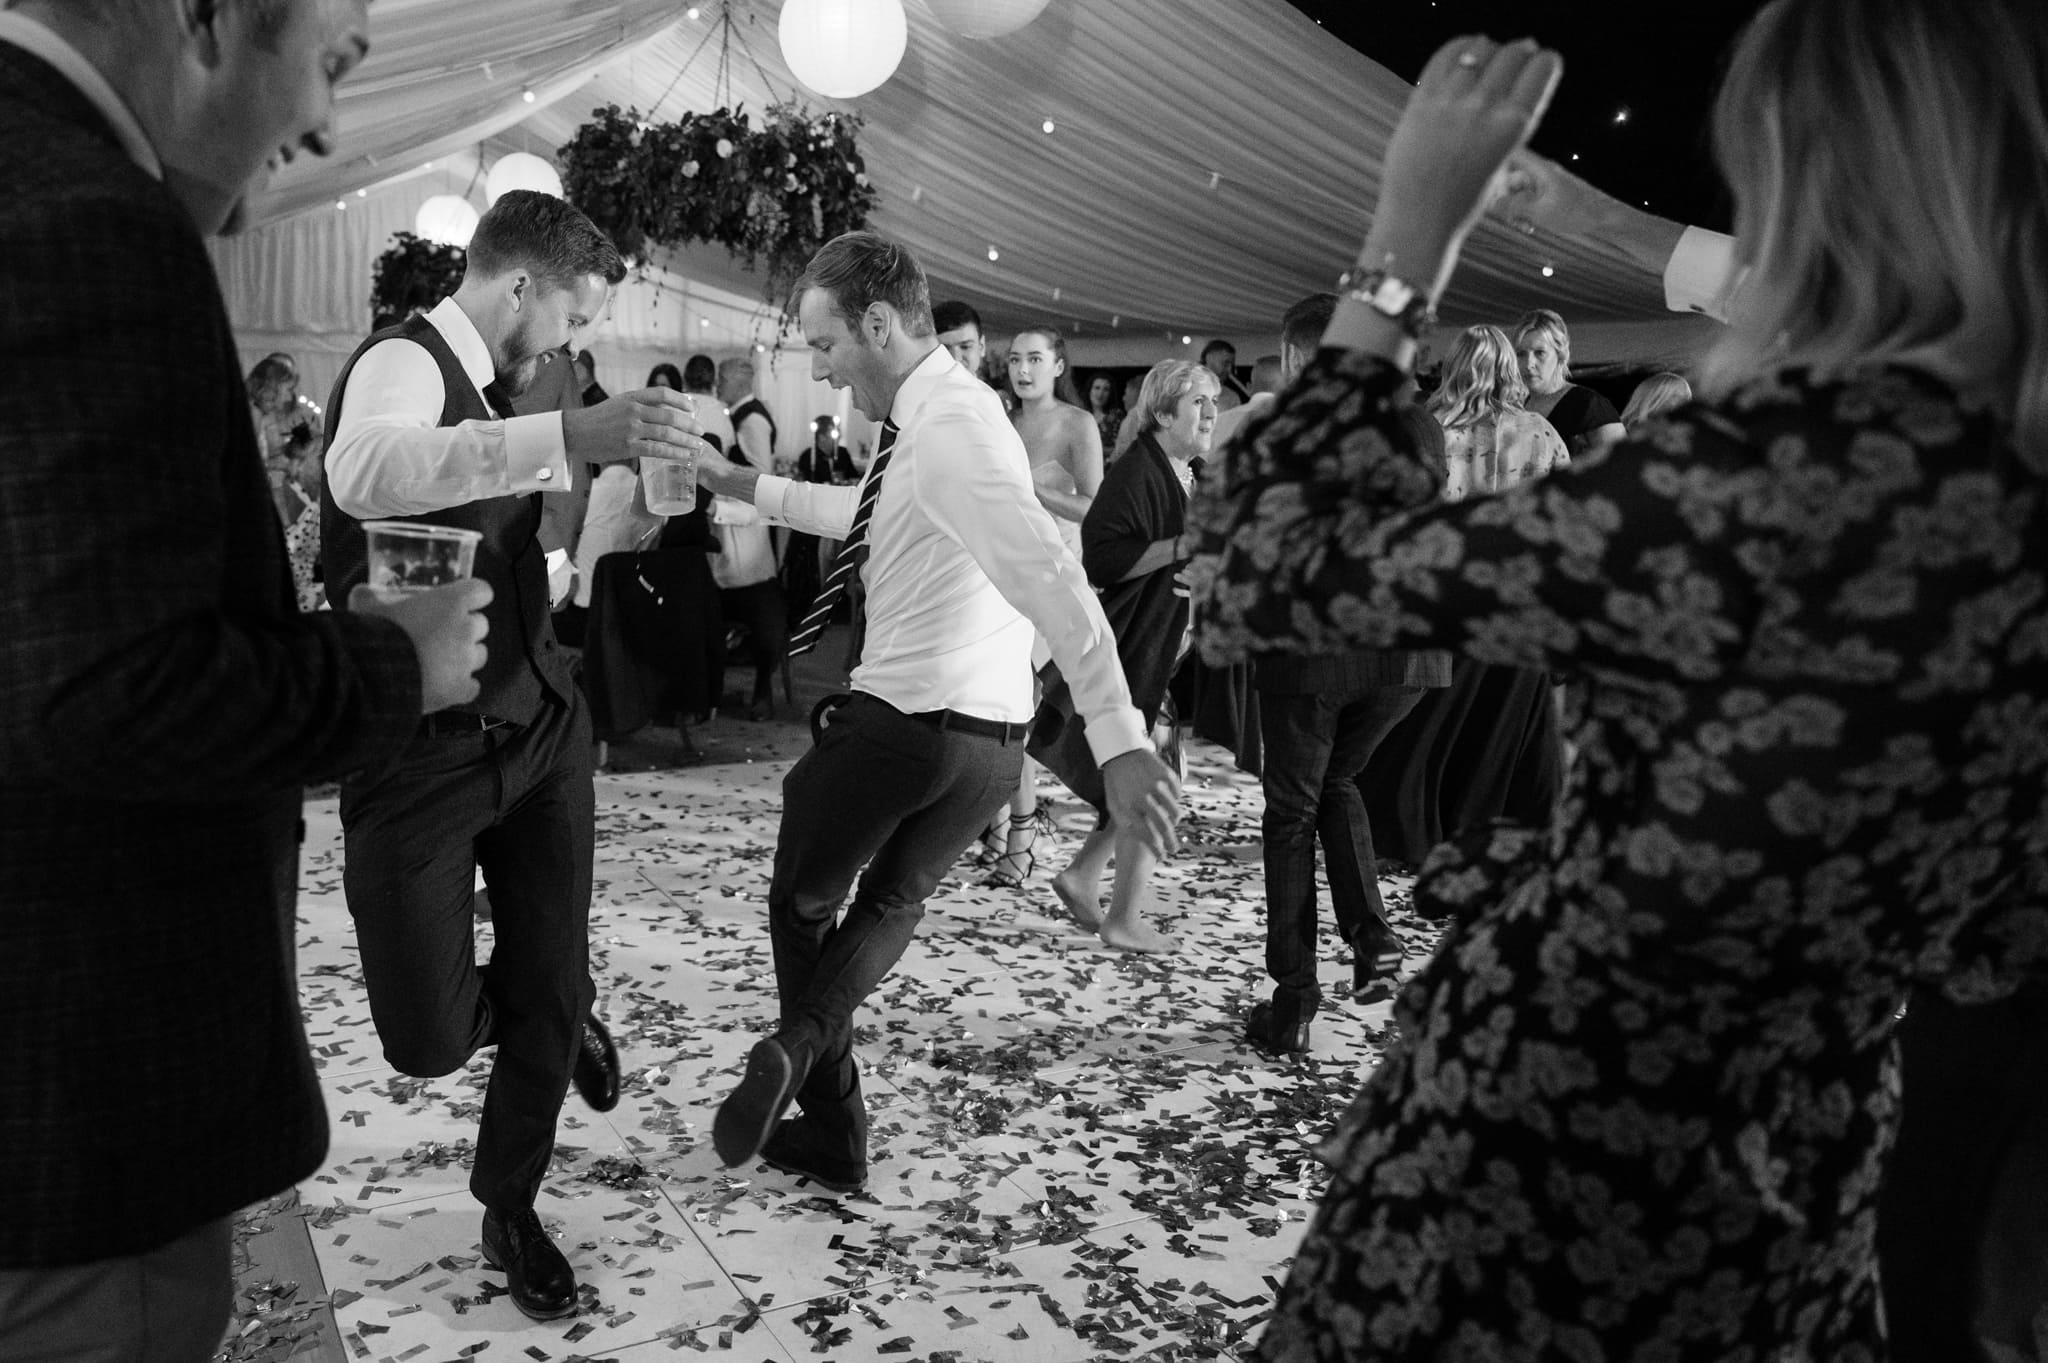 Two wedding guests throwing shapes on the dancefloor